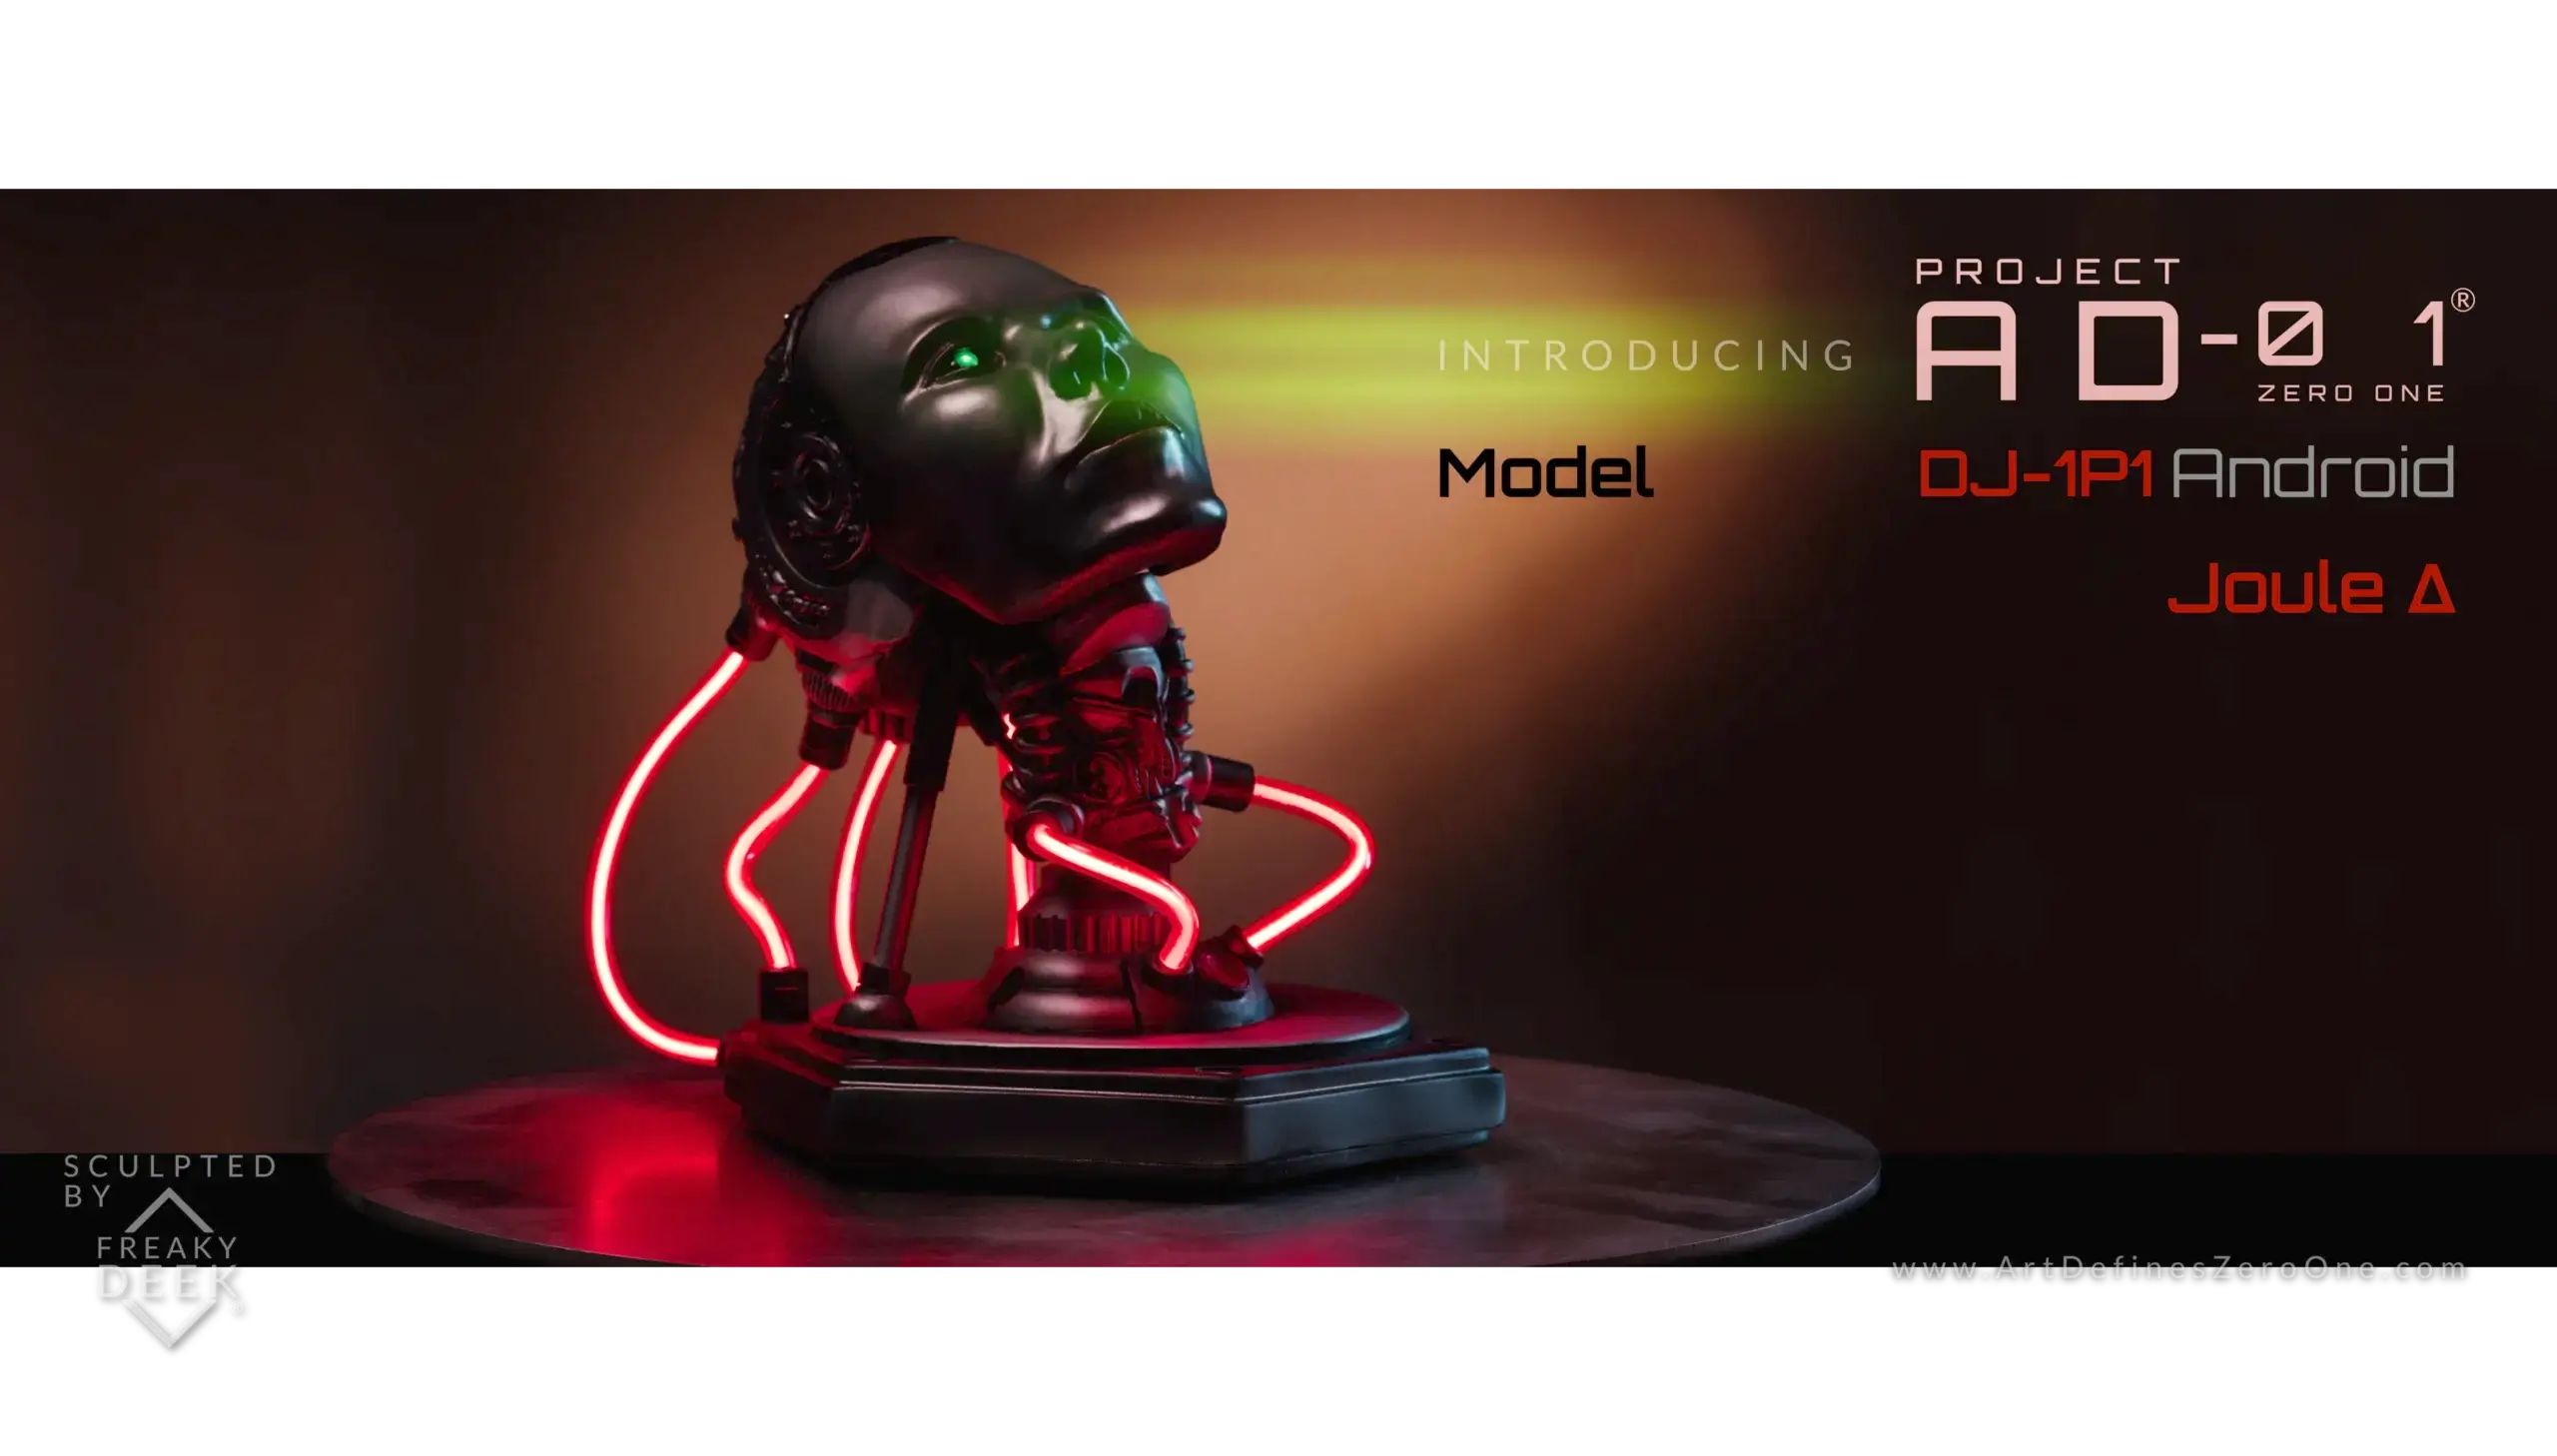 Project AD-01 handmade android sculpture Joule with red LED light front view